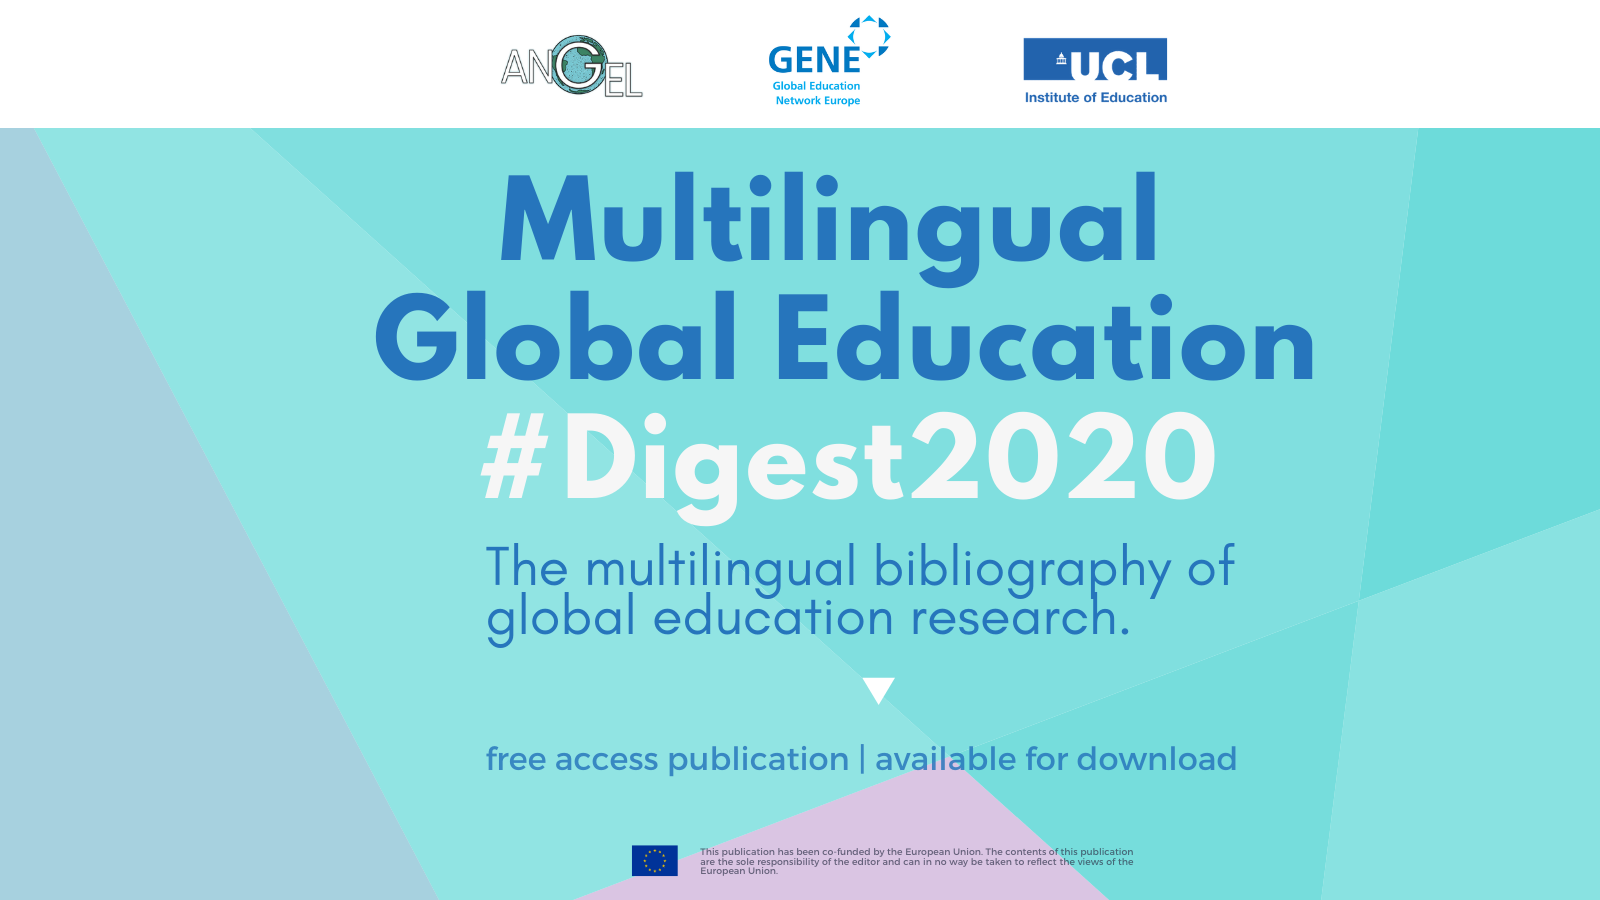 The new Global Education Digest 2020 - Multilingual edition – was launched this week